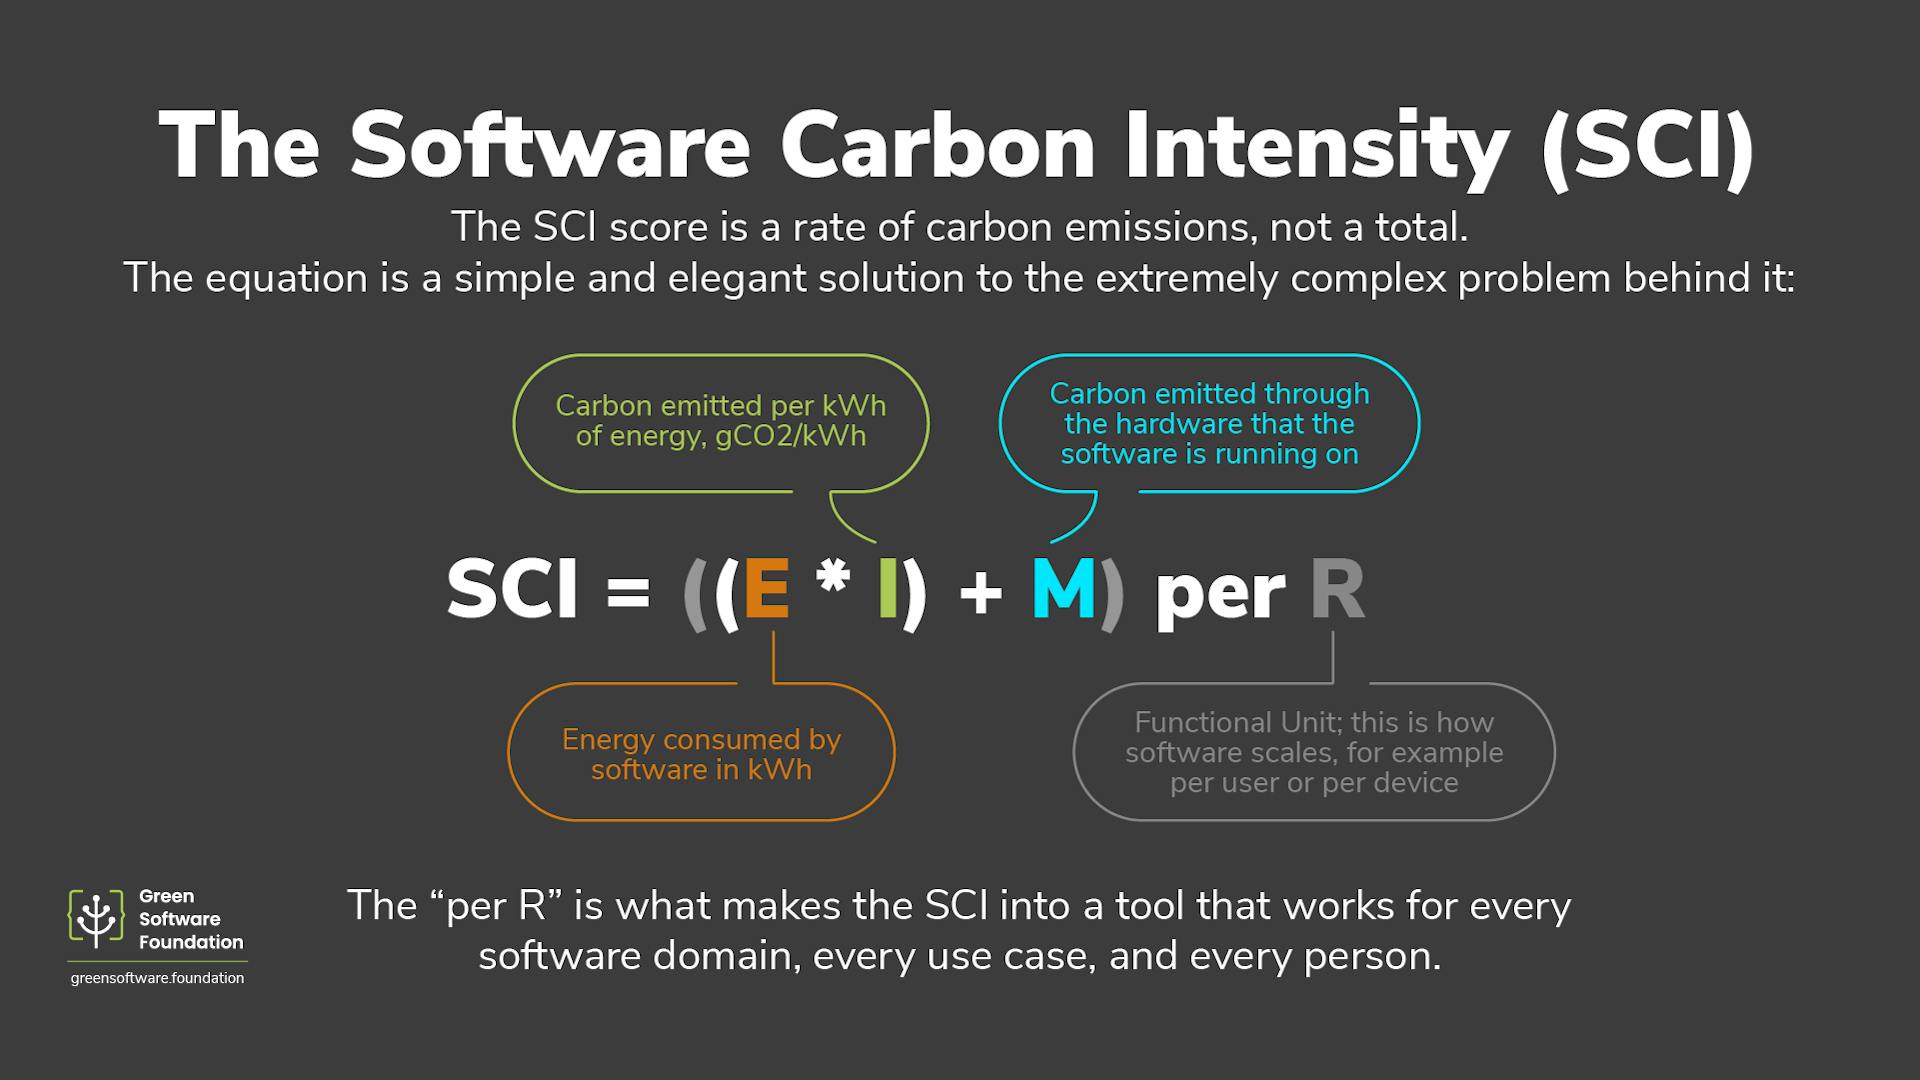 The Definition of Software Carbon Intensity (SCI) by the Green Software Foundation